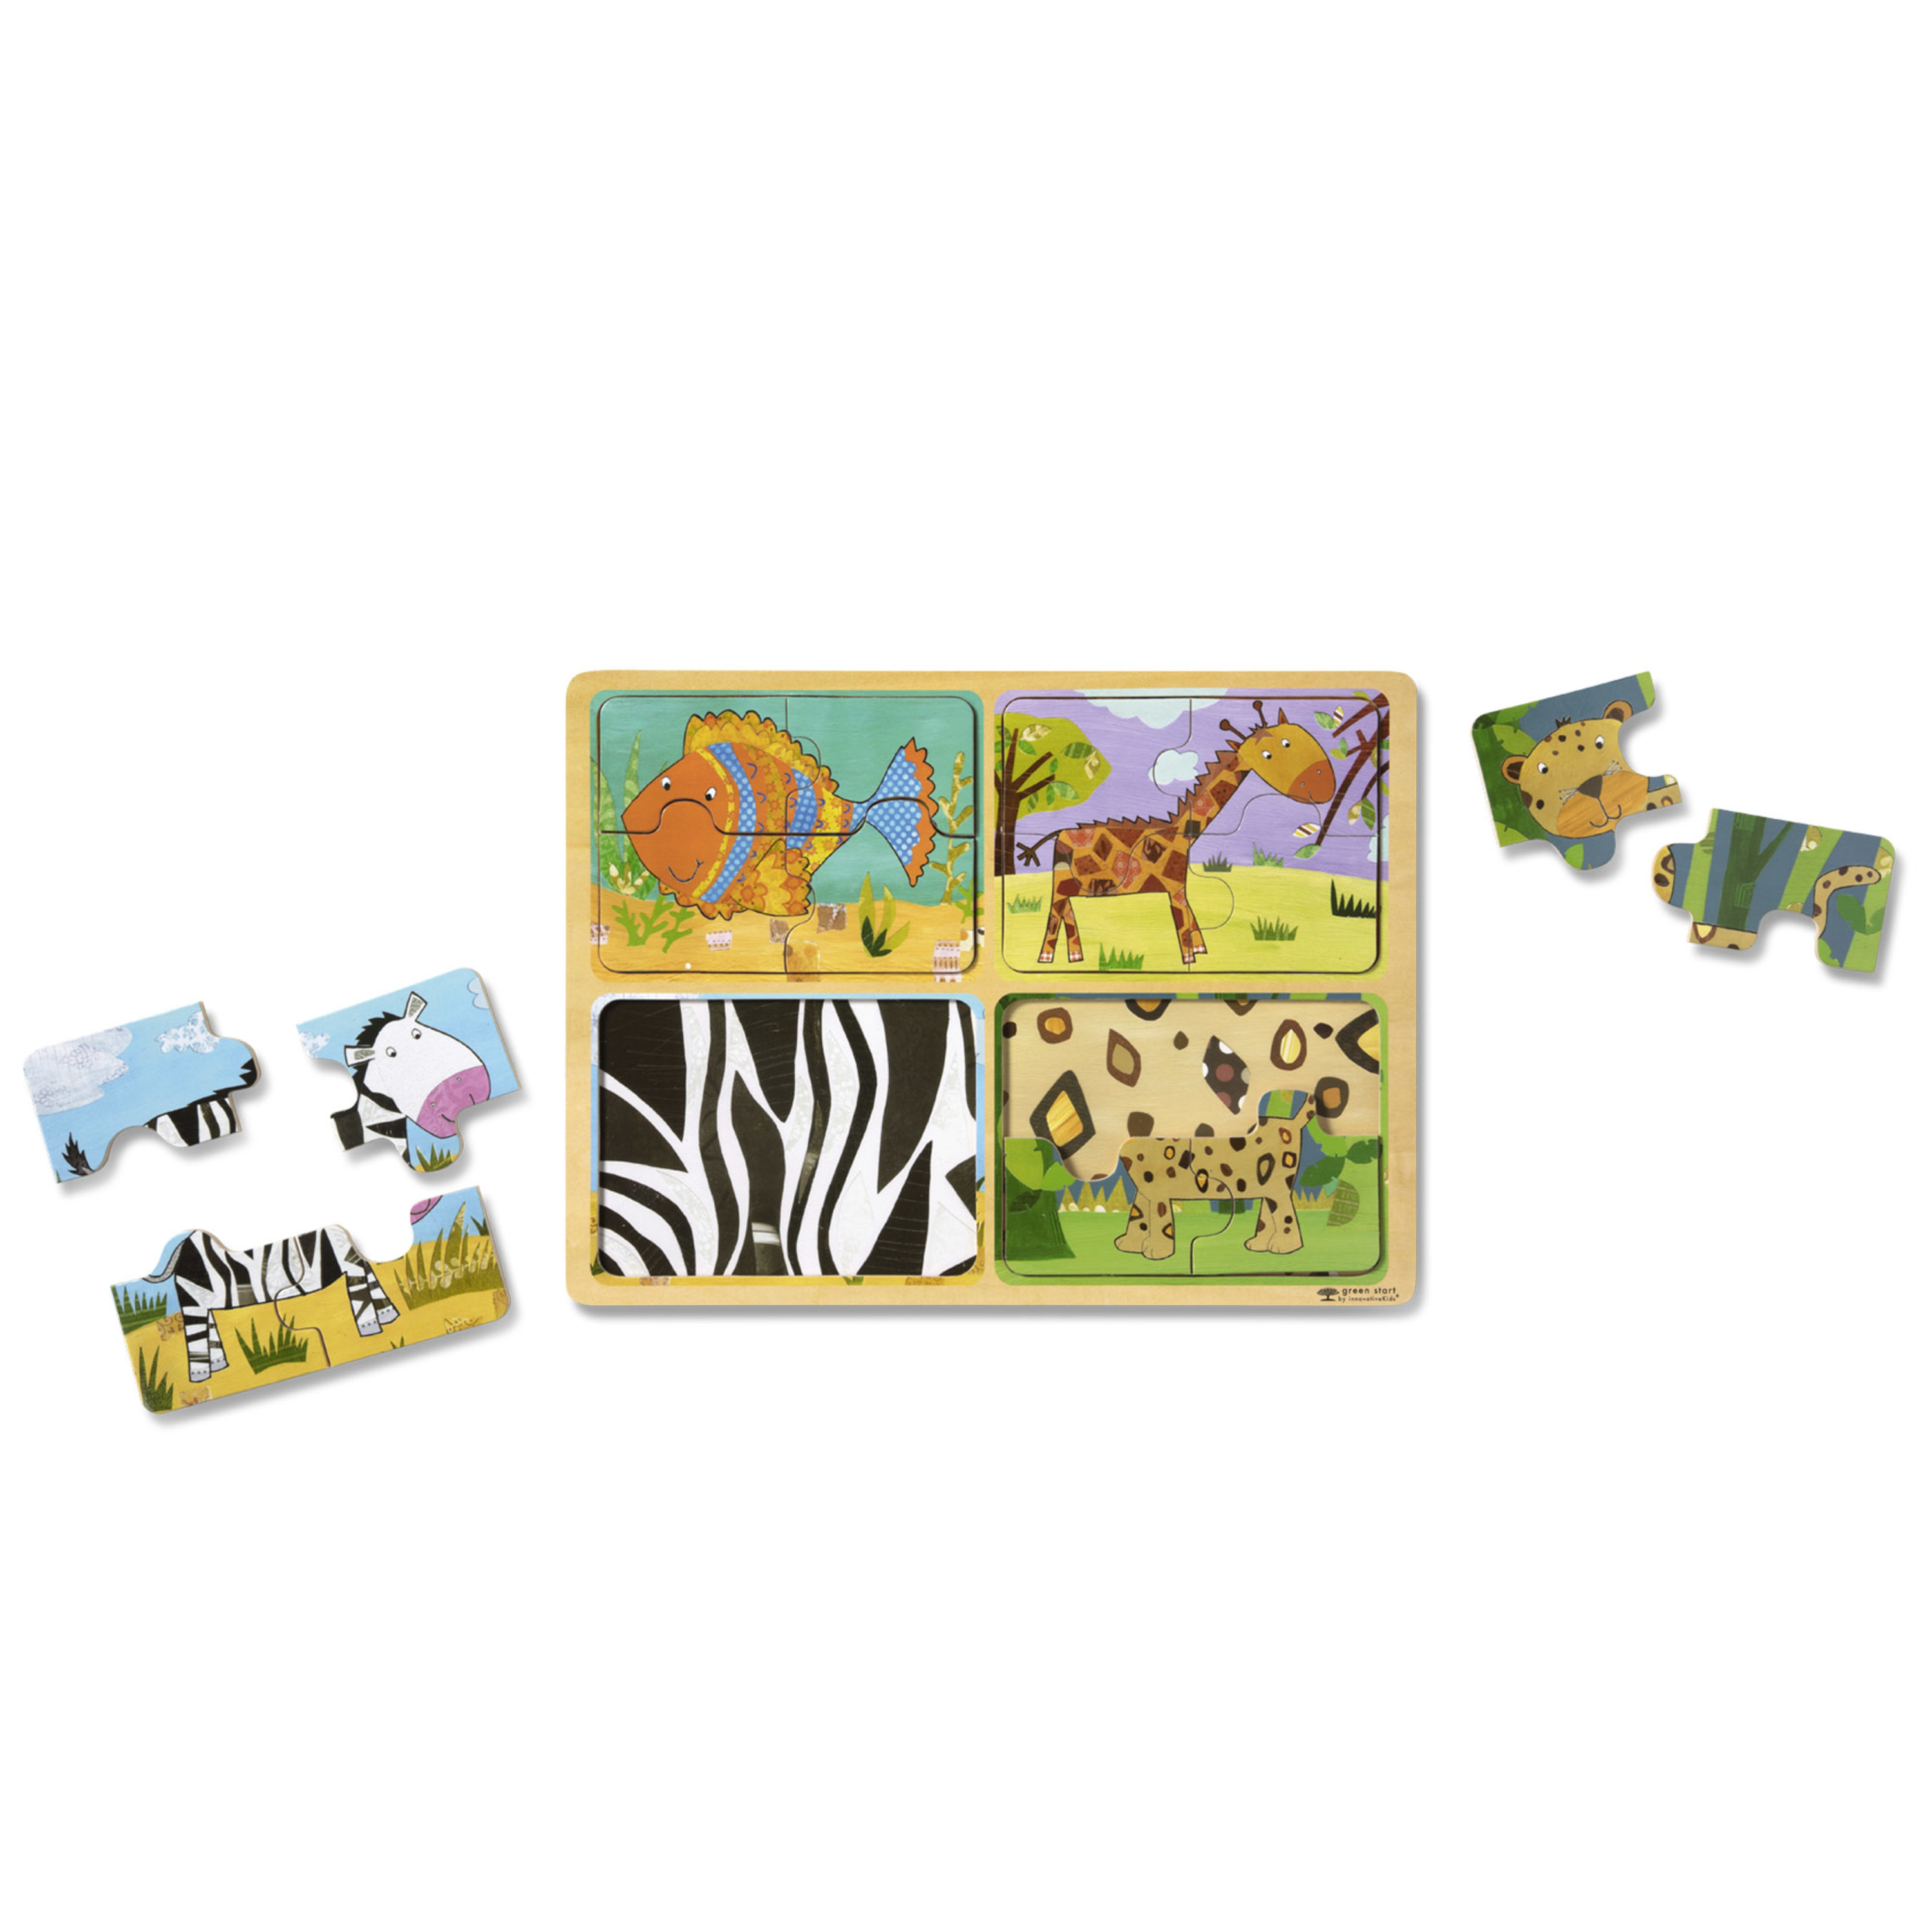 Melissa & Doug Natural Play Wooden Puzzle: Animal Patterns (Four 4-Piece Animal Puzzles) - image 4 of 5